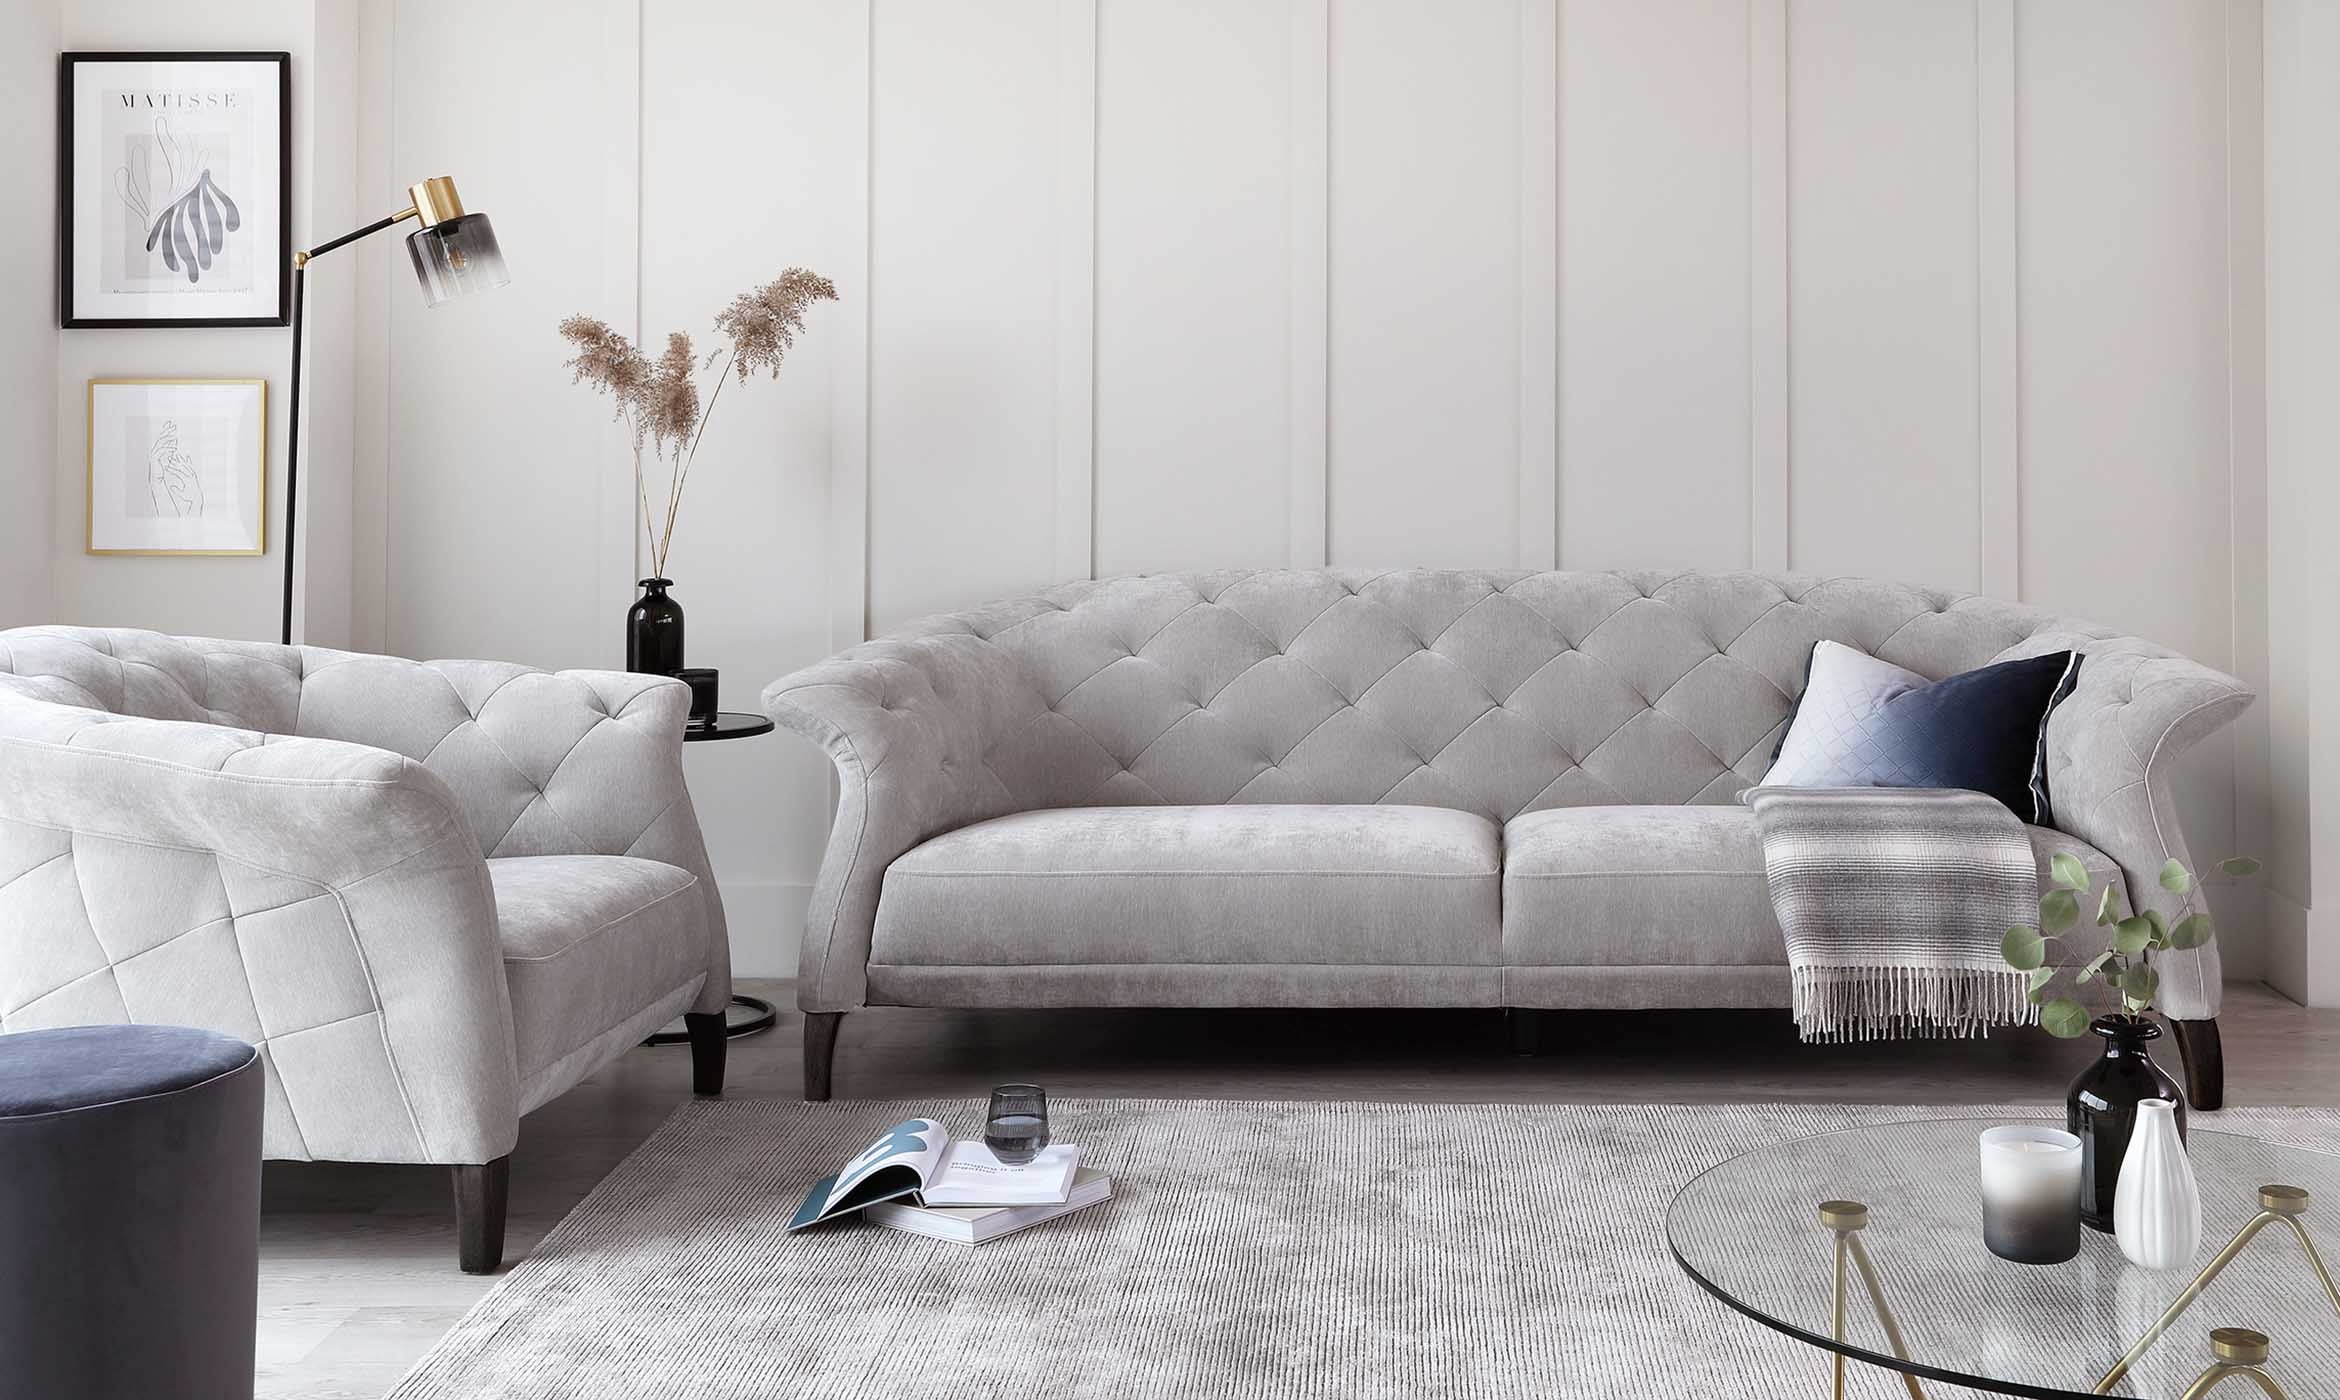 Interior Styling Tips: Create An Insta-Worthy Living Room With Neutral Tones